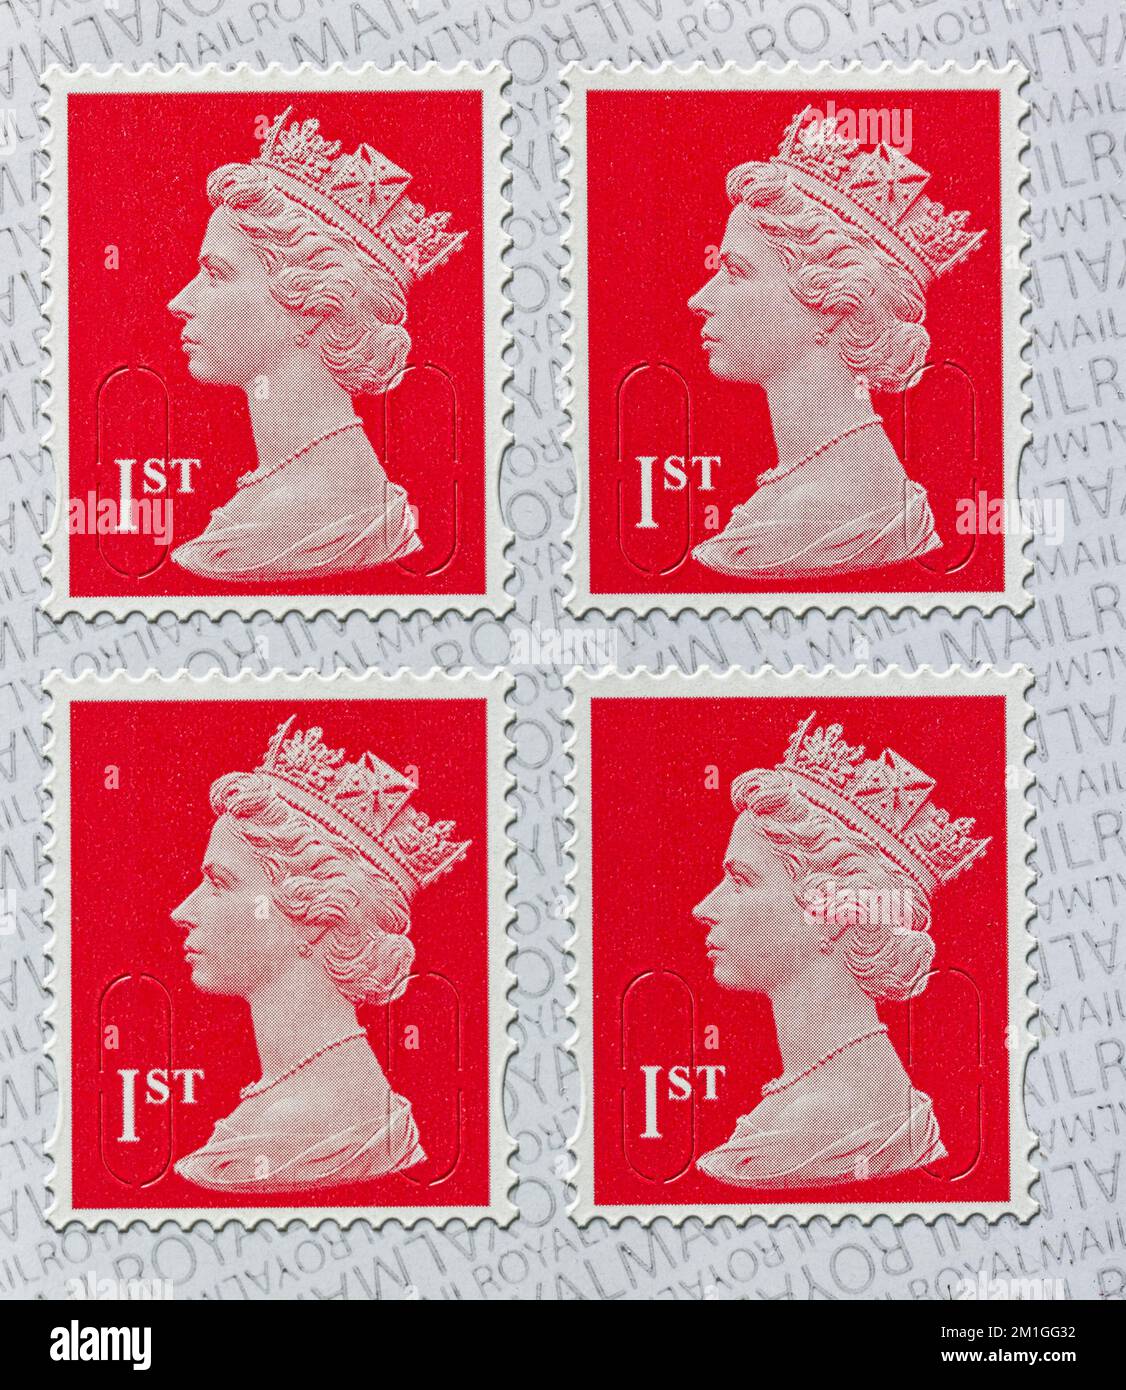 First class postage stamps, UK, bearing the head of queen Elizabeth the second. Stock Photo